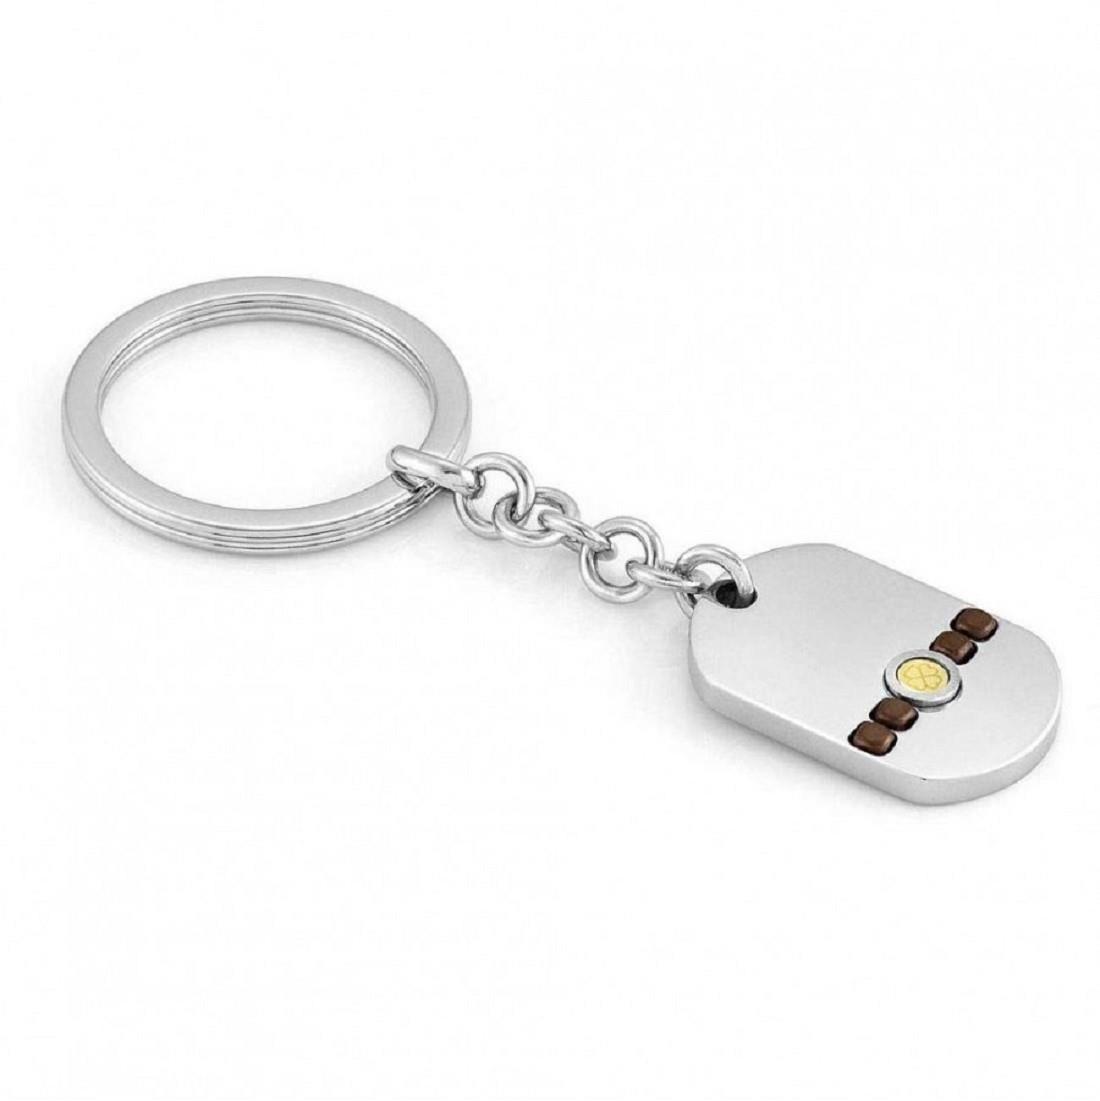 Steel and gold keychain - NOMINATION